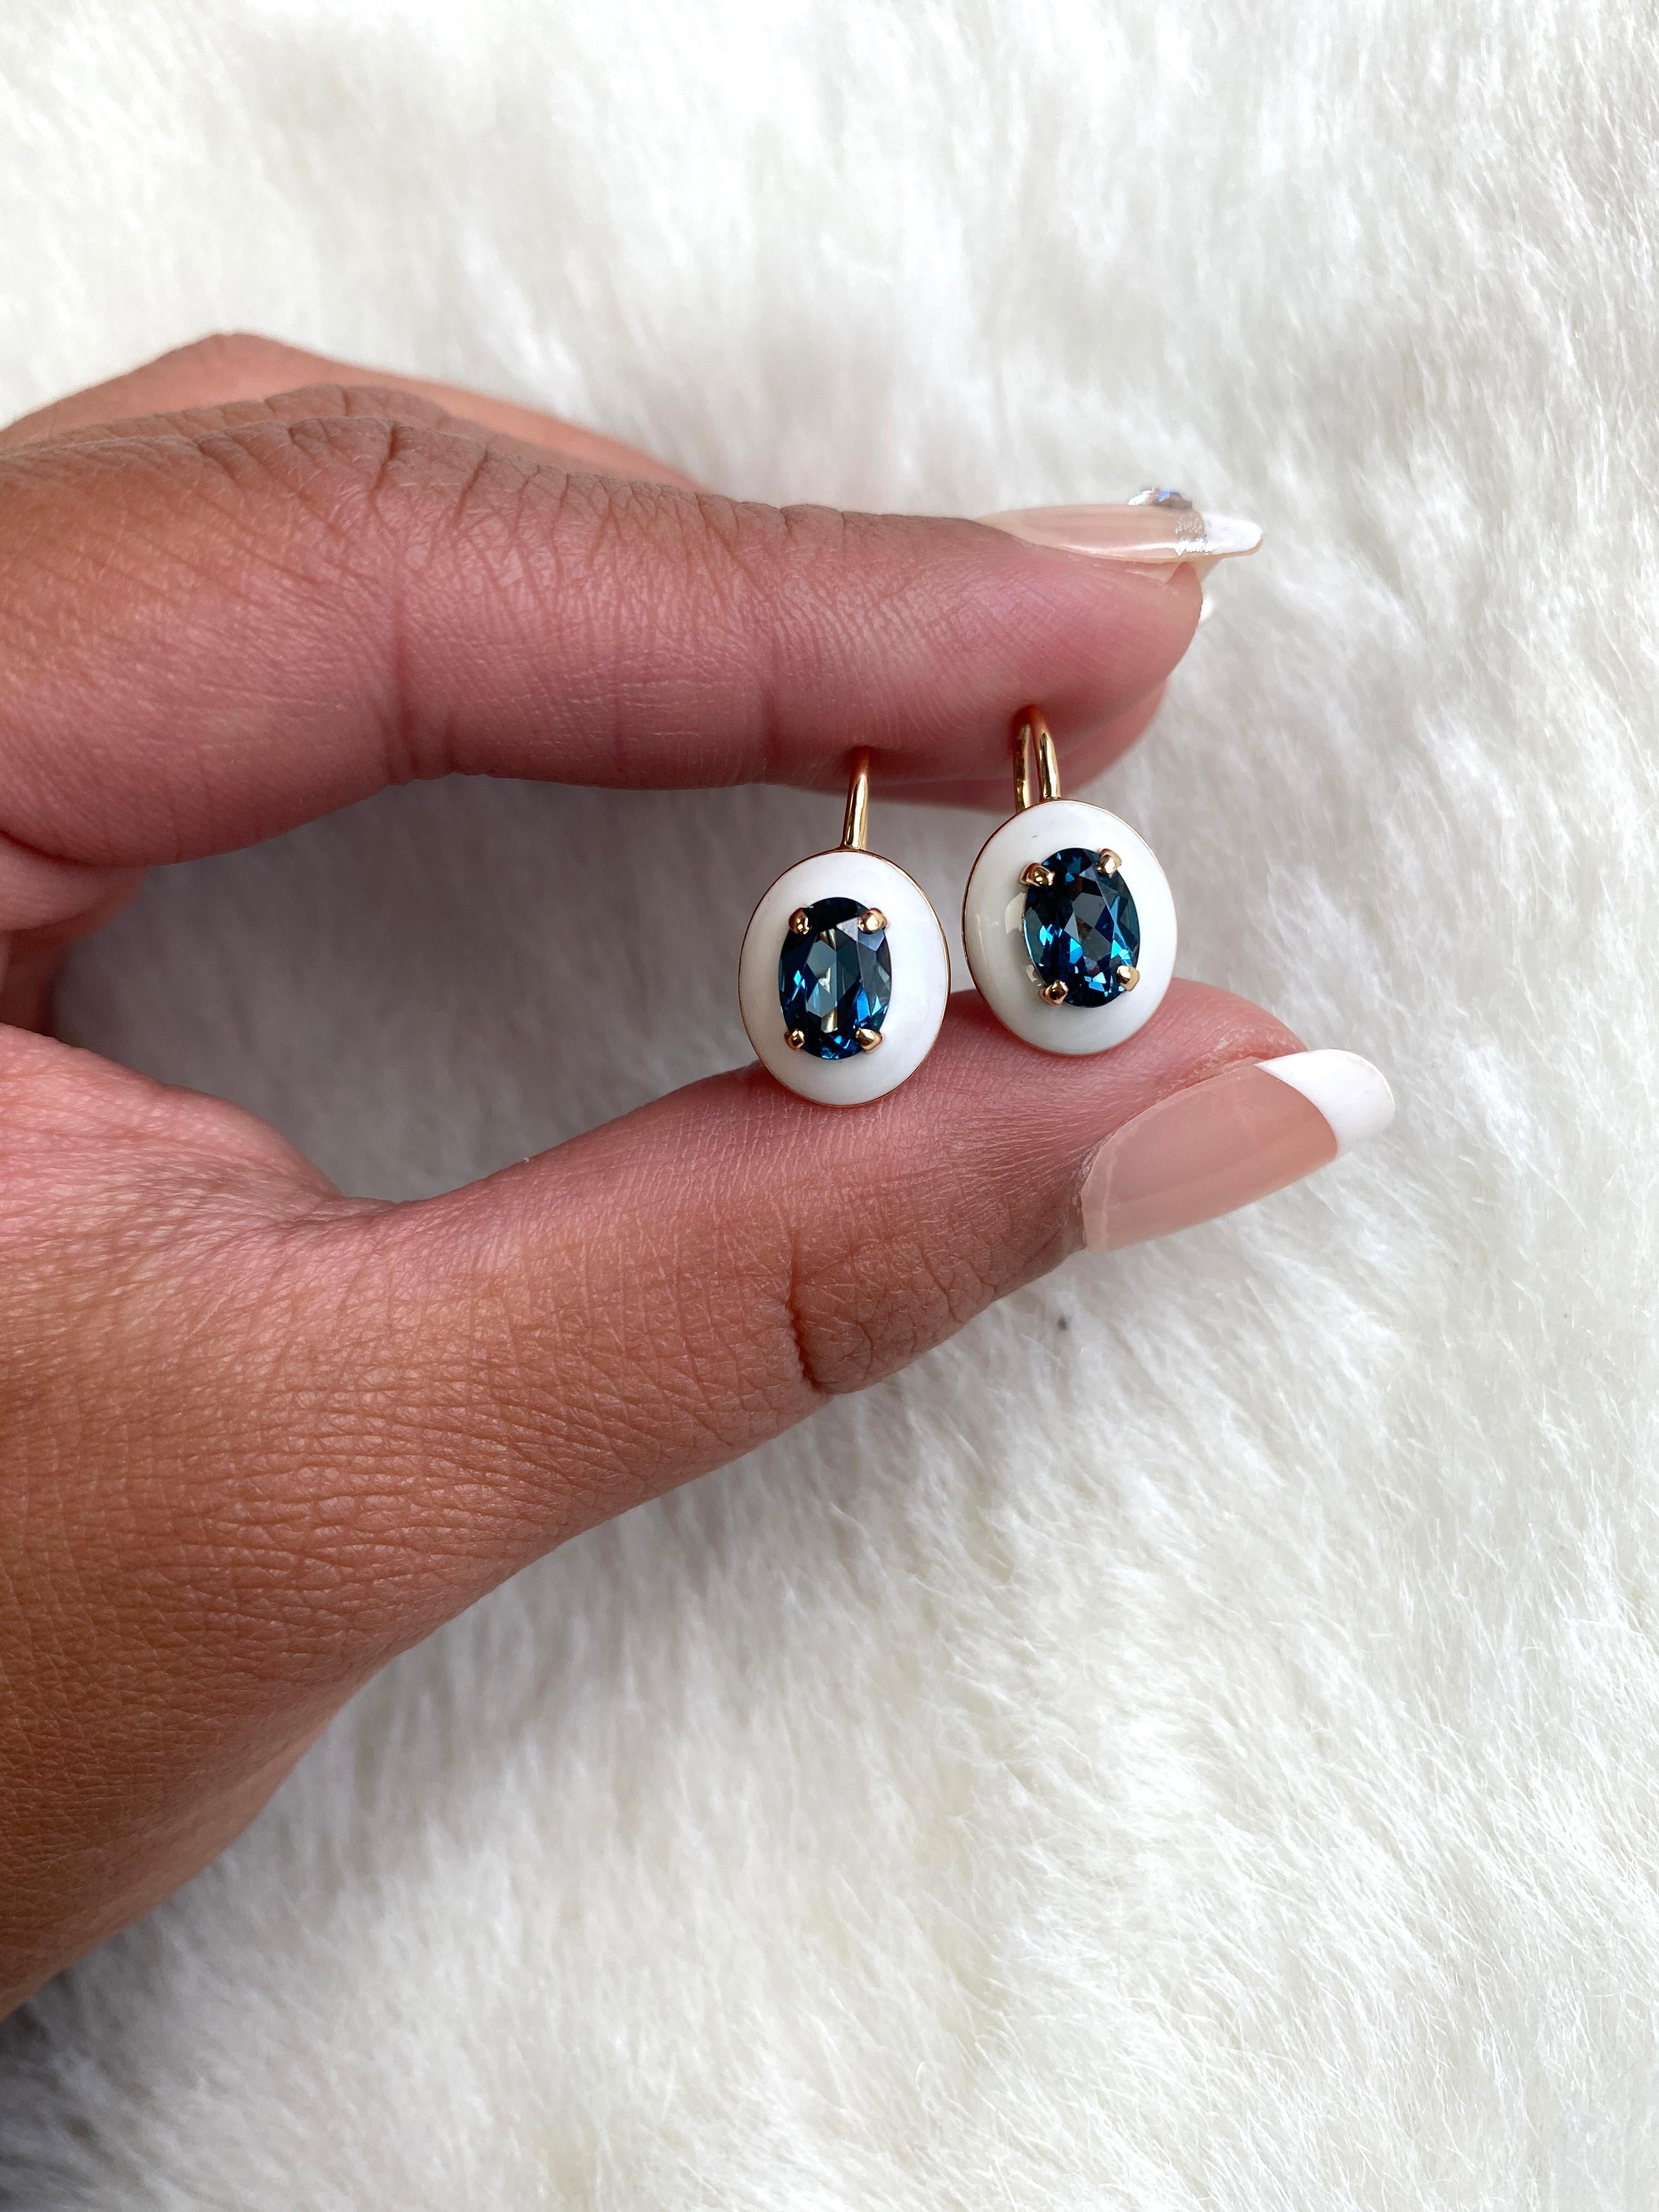 These unique earrings are a Faceted Oval London Blue Topaz, with White Enamel border and Lever back. From our ‘Queen’ Collection, it was inspired by royalty, but with a modern twist. The combination of enamel, and London Blue Topaz represents power,